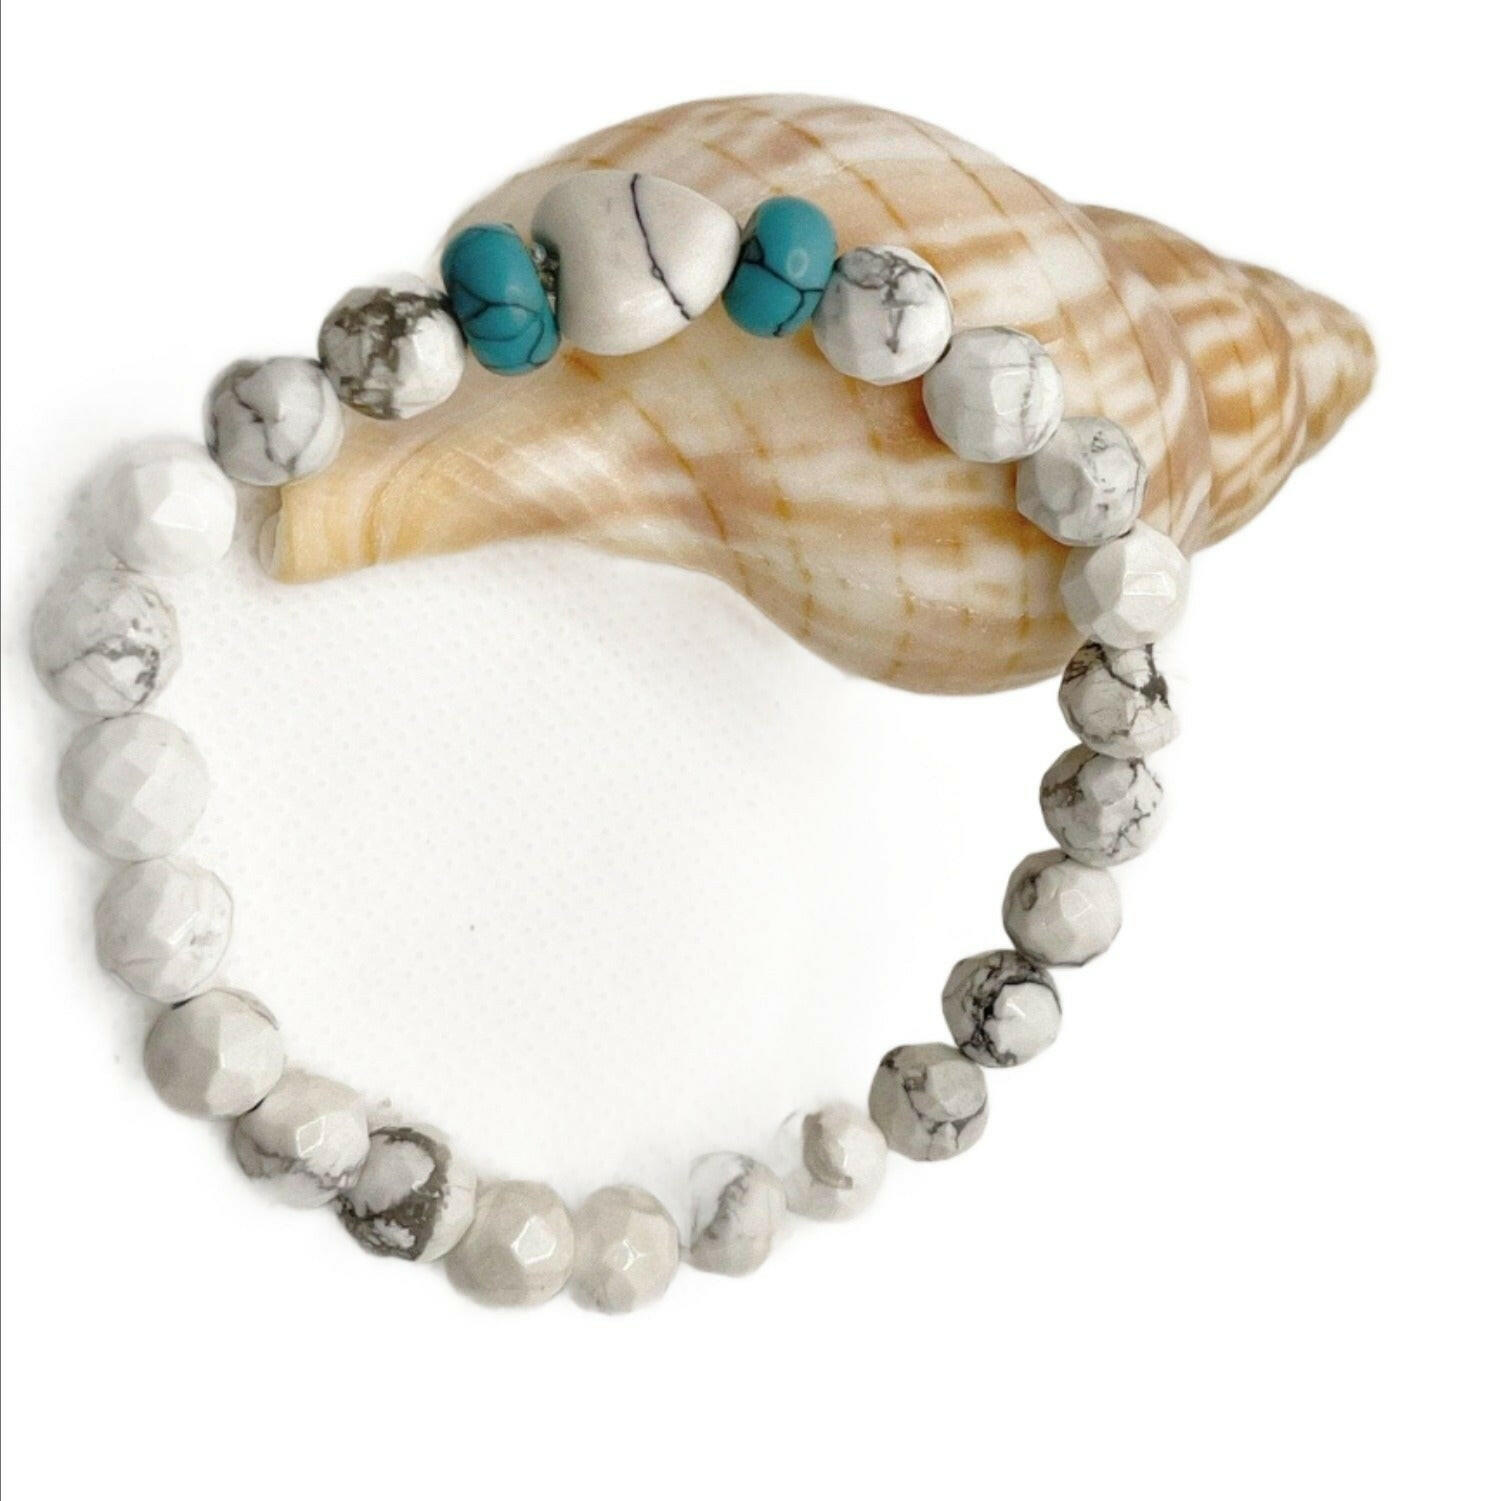 Bec Sue Jewelry Shop bracelet 6.5 / white / white howlite/turquoise One-of-a-Kind White Howlite and Blue Turquoise Rondelle Stretch Bracelet with 8mm Gemstone Beads Tags 166